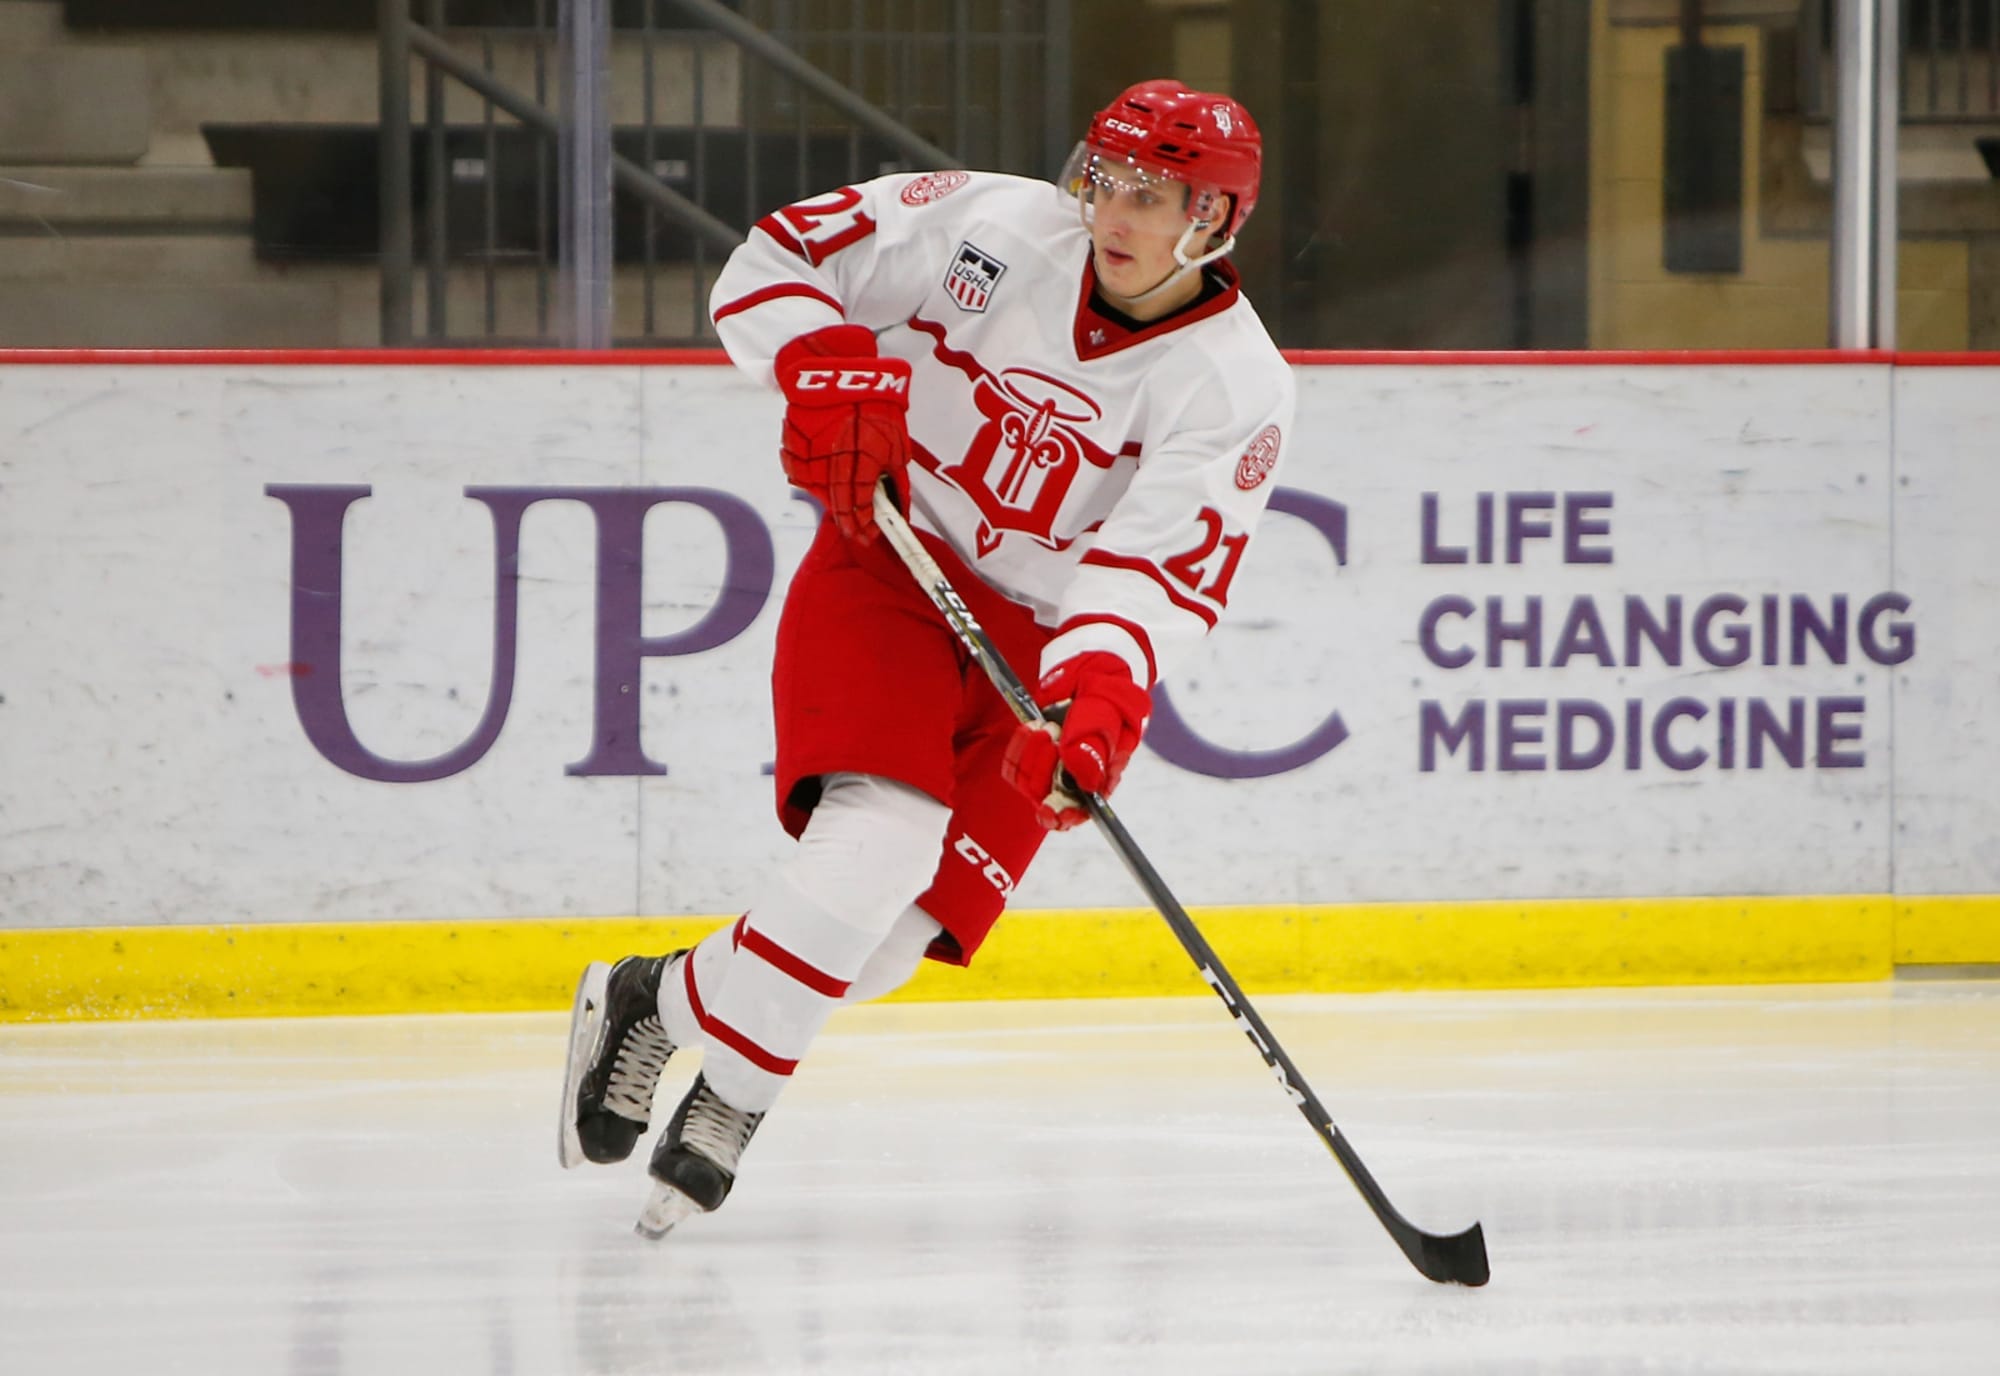 Dubuque Takes on Waterloo in USHL Match-Up Tonight